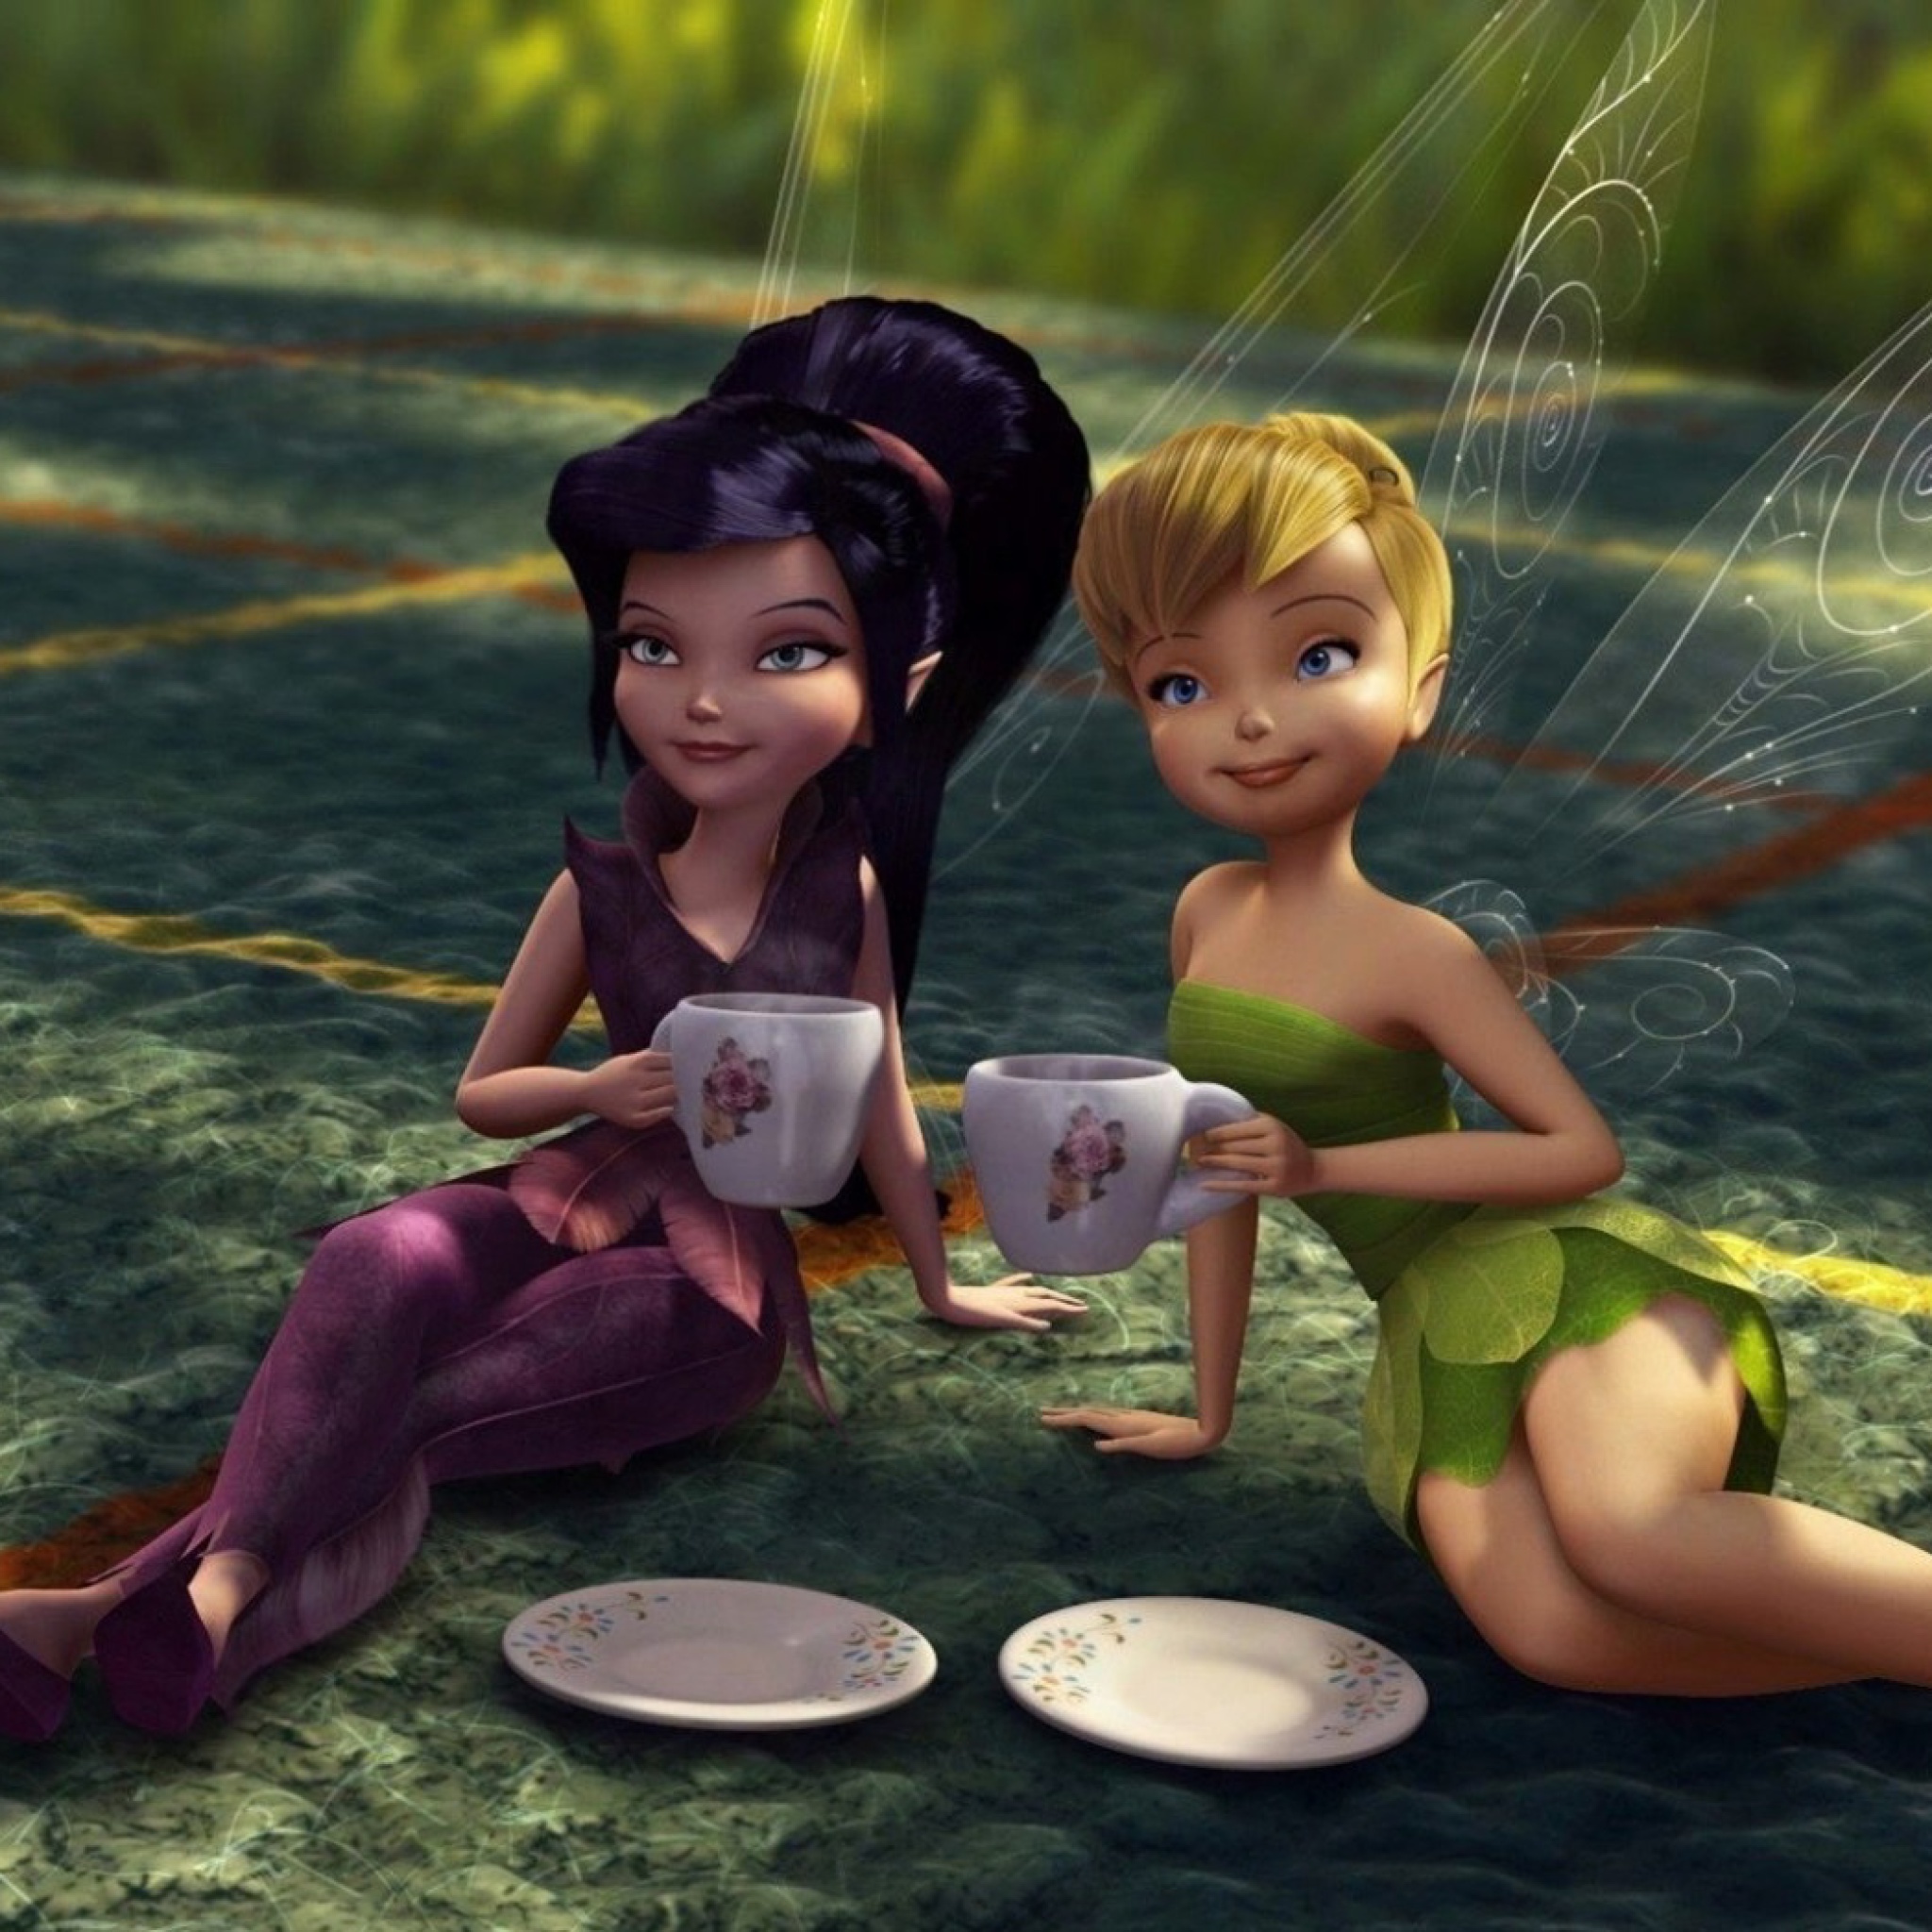 Das Tinker Bell And The Great Fairy Rescue Wallpaper 2048x2048